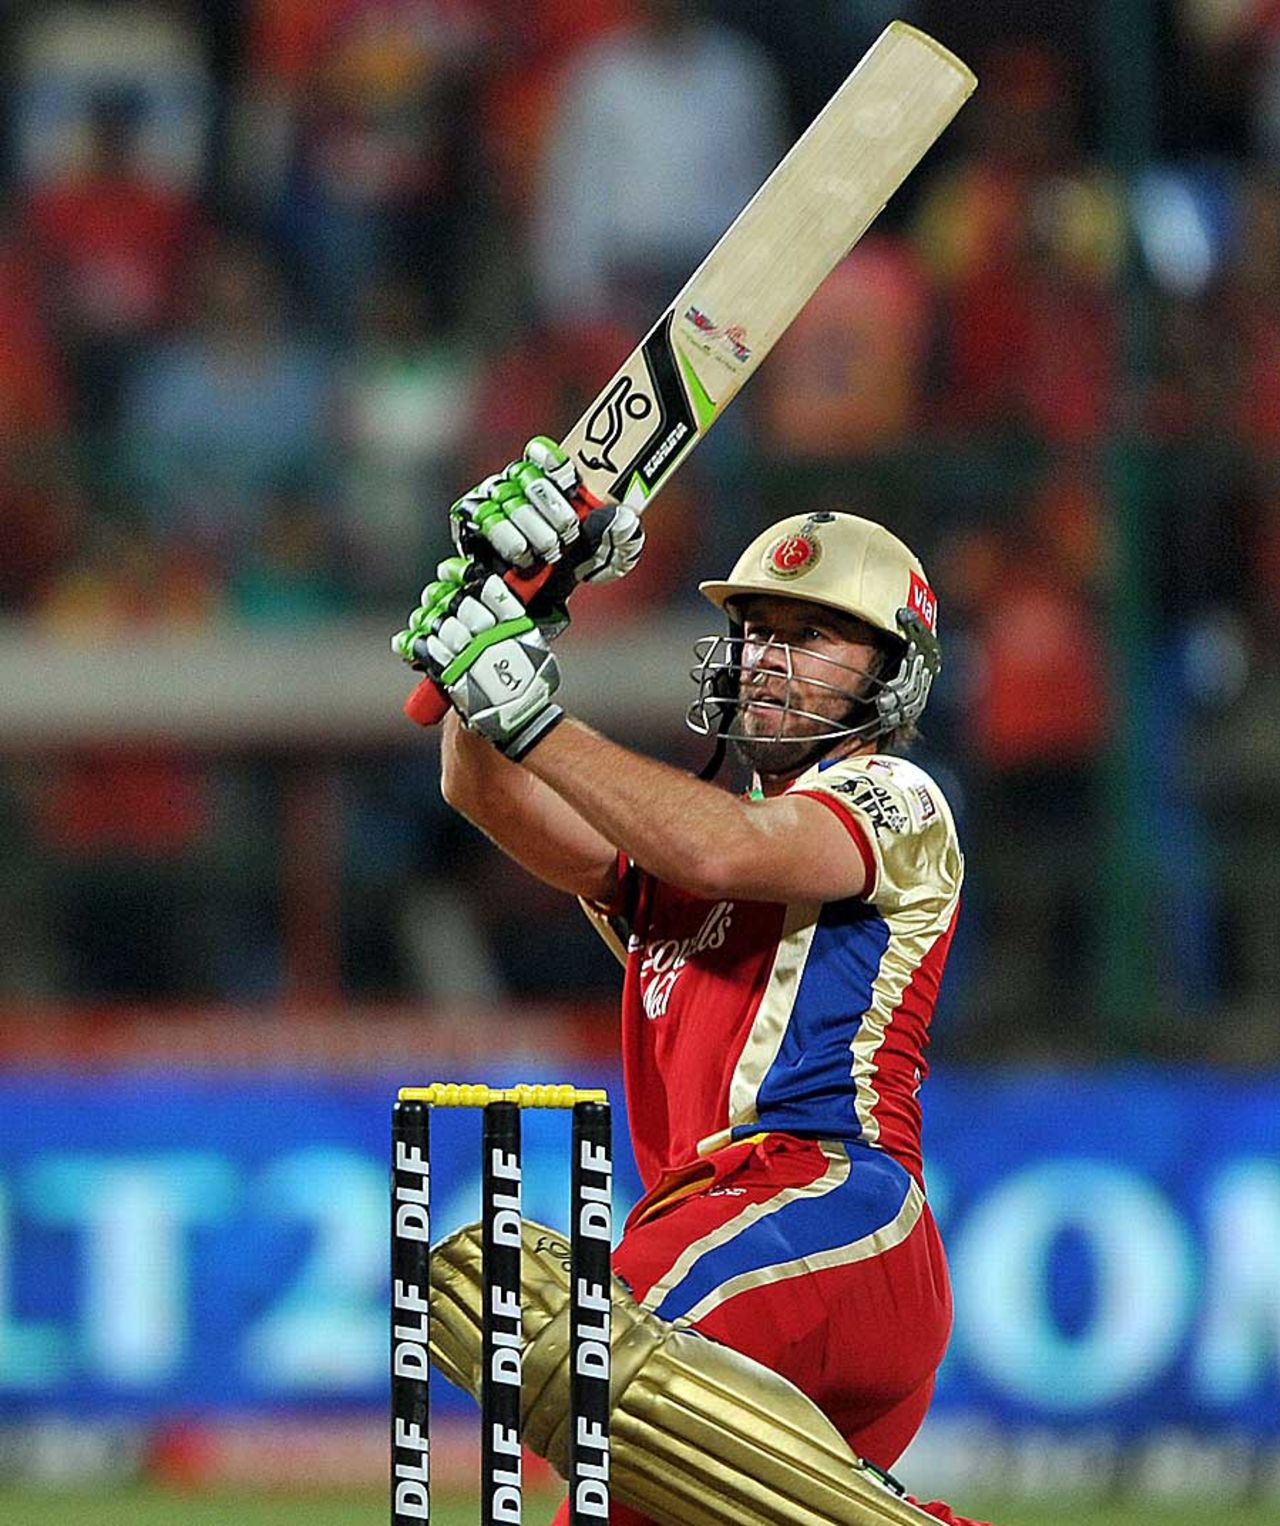 AB de Villiers' stunning cameo won the game for Royal Challengers Bangalore, Royal Challengers Bangalore v Deccan Chargers, IPL 2012, May 6, 2012